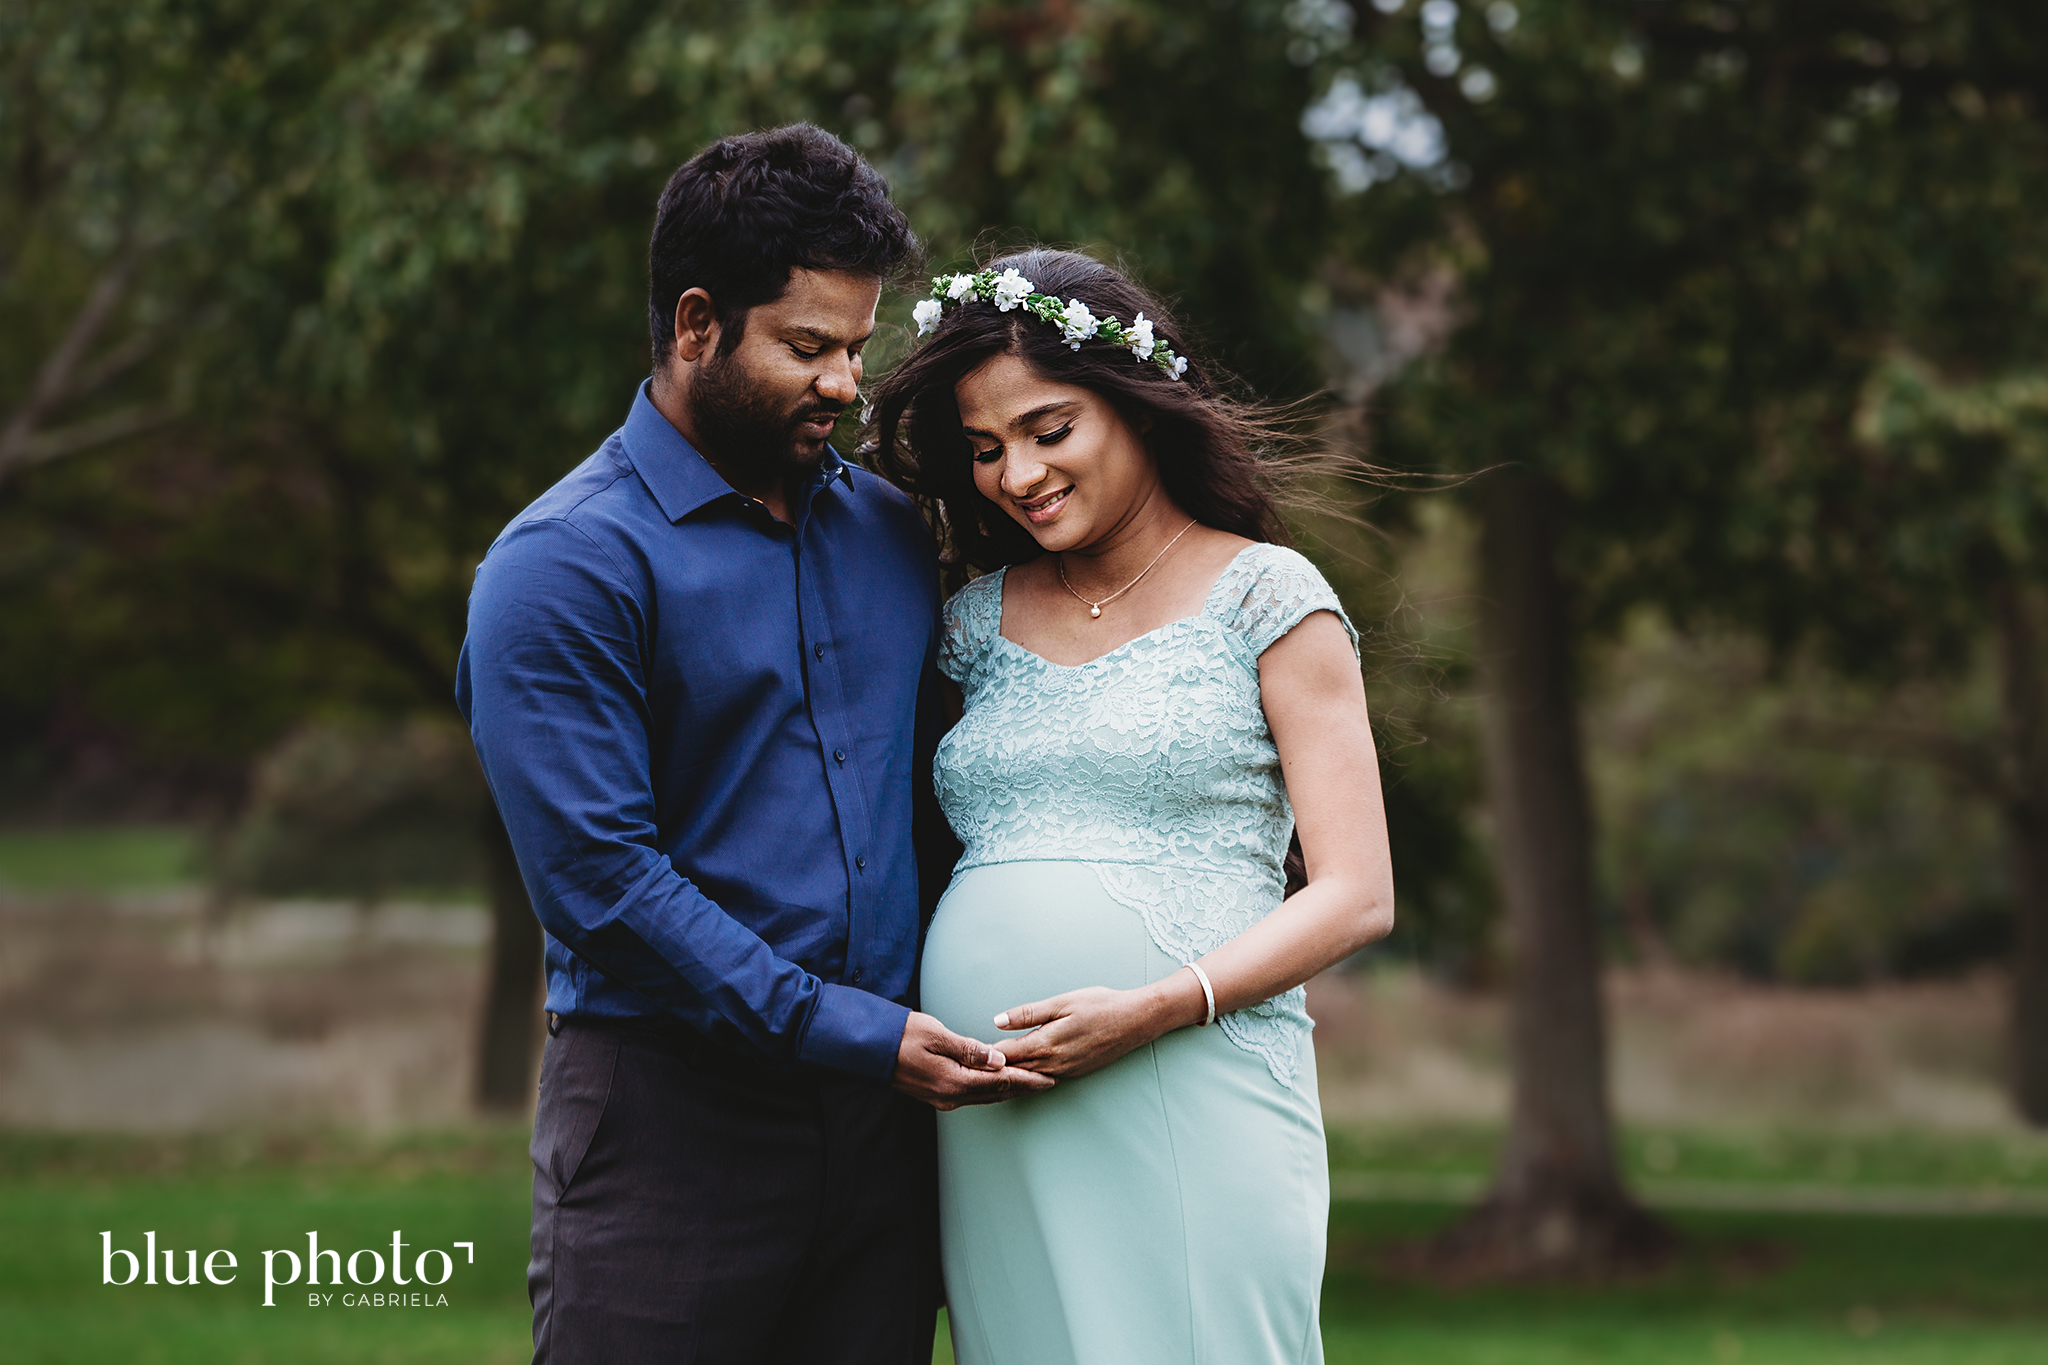 Socially distanced maternity session in West London. The couple is looking at the belly and smiling. 